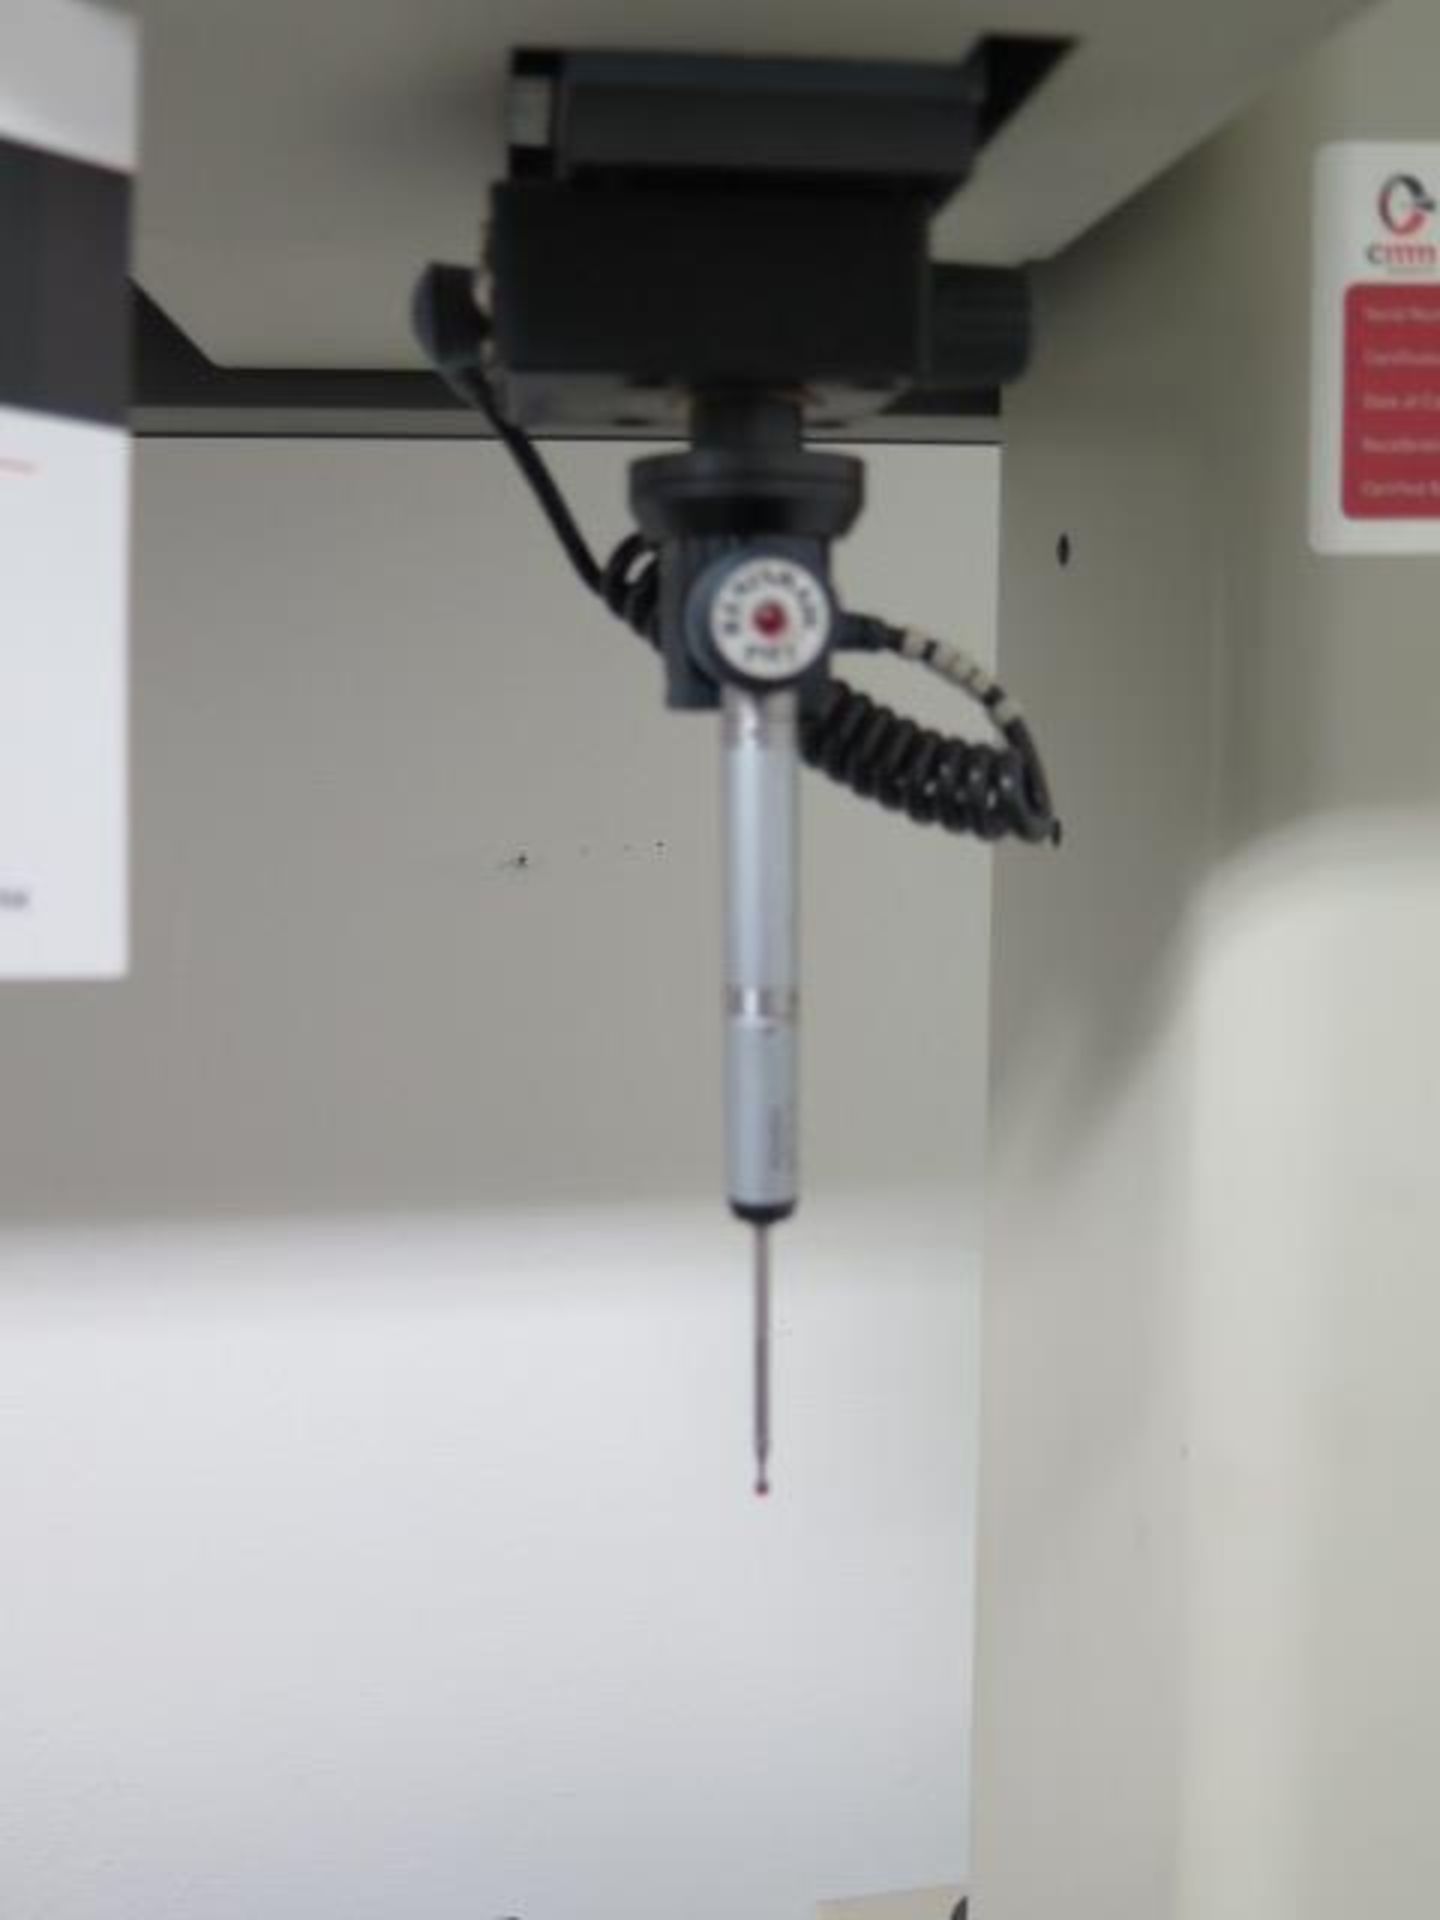 Mitutoyo BH706 CMM Machine s/n 0393507-004107111 w/ Renishaw PH-1 Probe, QC5000 Software, SOLD AS IS - Image 5 of 14